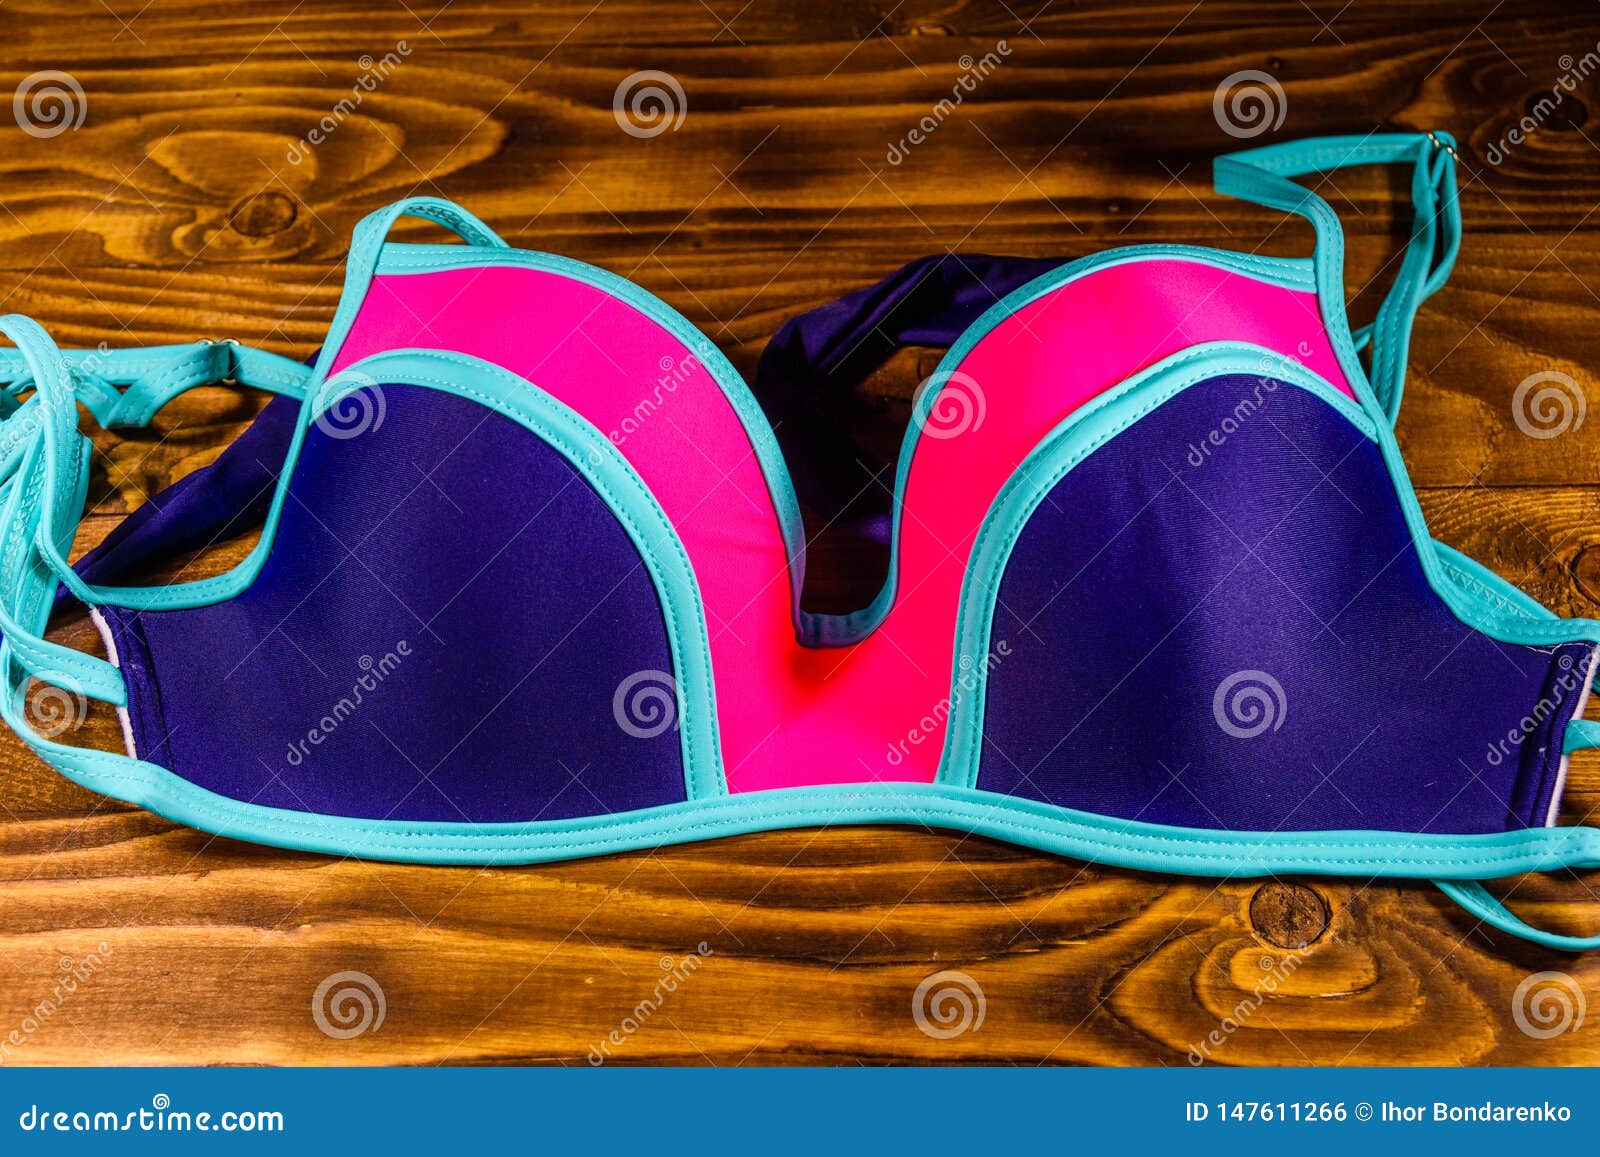 Female Swimming Suit on a Wooden Table Stock Photo - Image of accessory ...